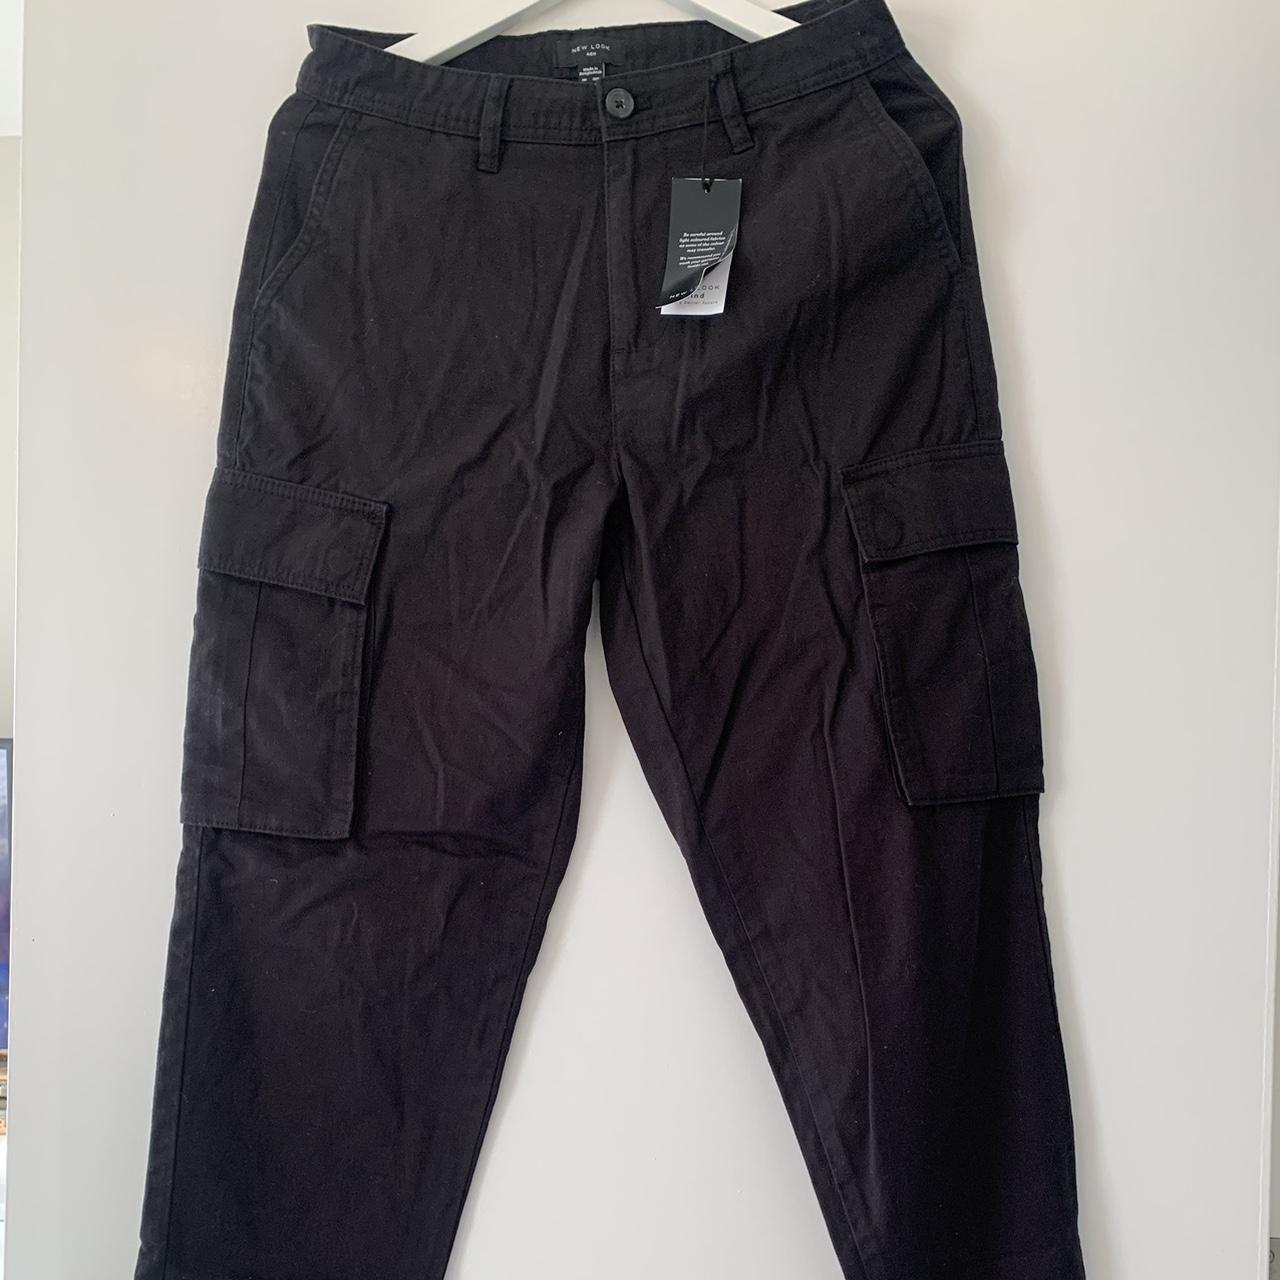 New black cargo pants See label for sizing - Depop